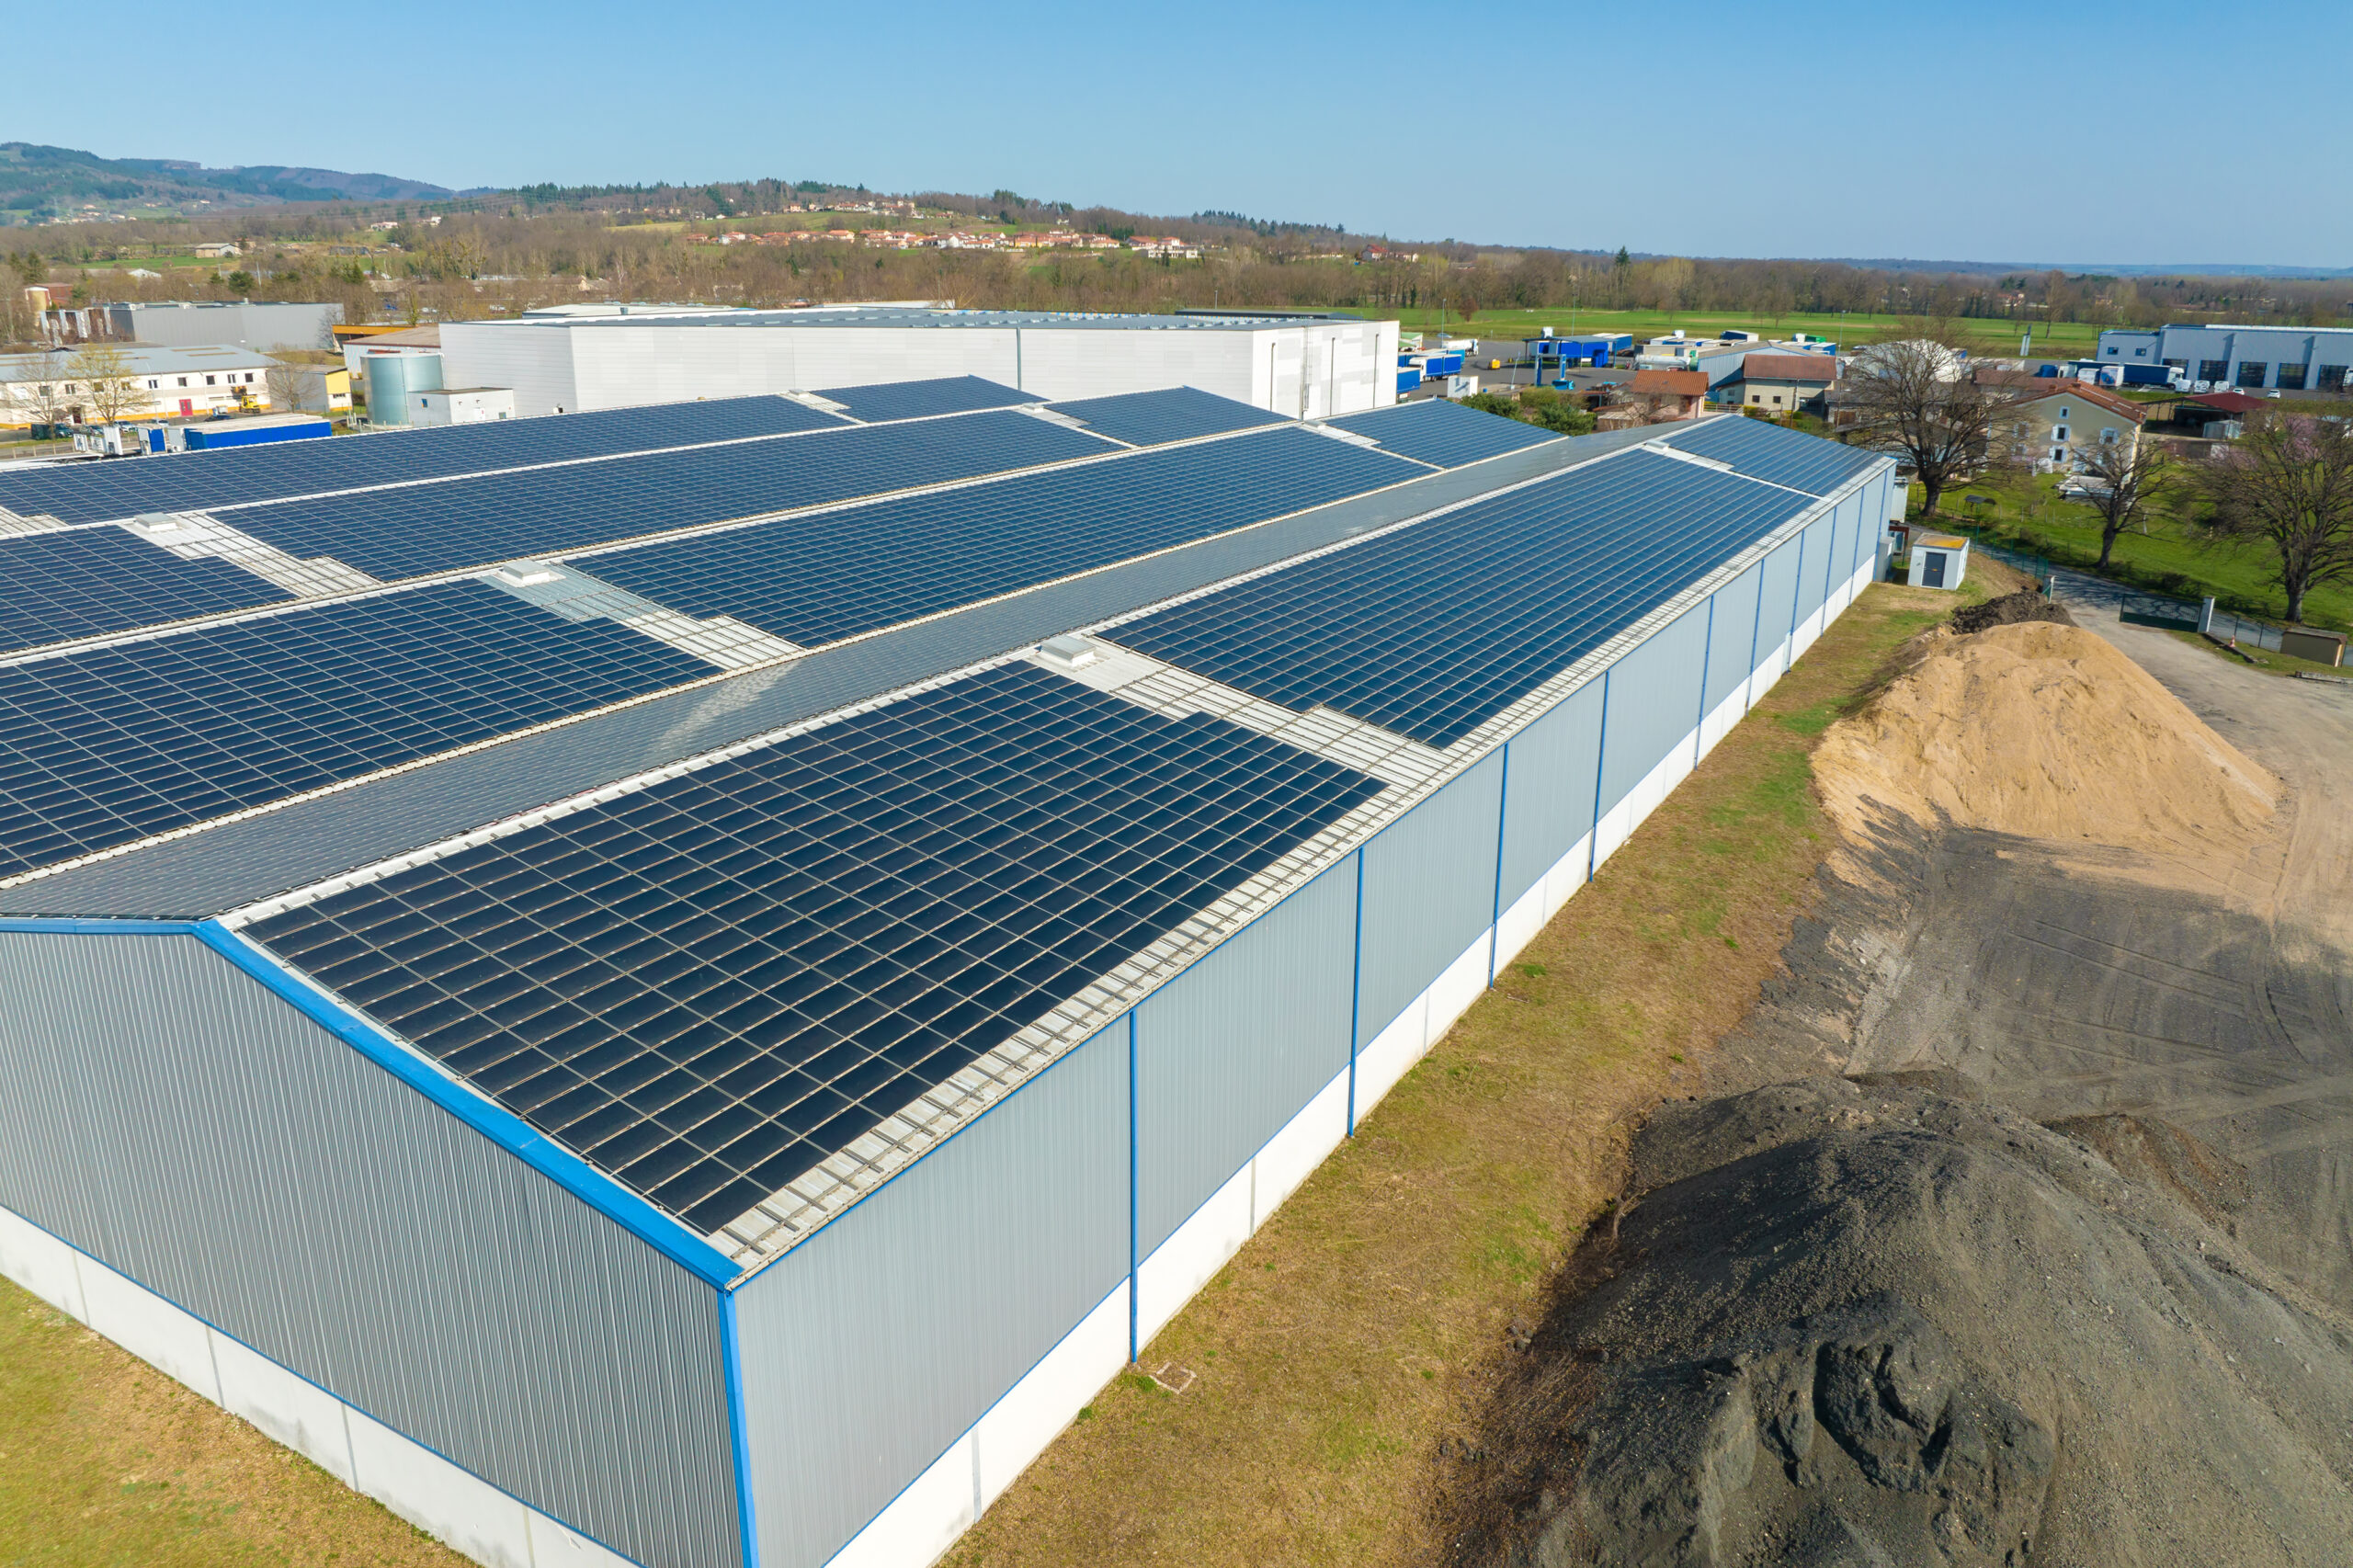 Aerial view of solar power plant with blue photovoltaic panels mounted on industrial building roof for producing green ecological electricity